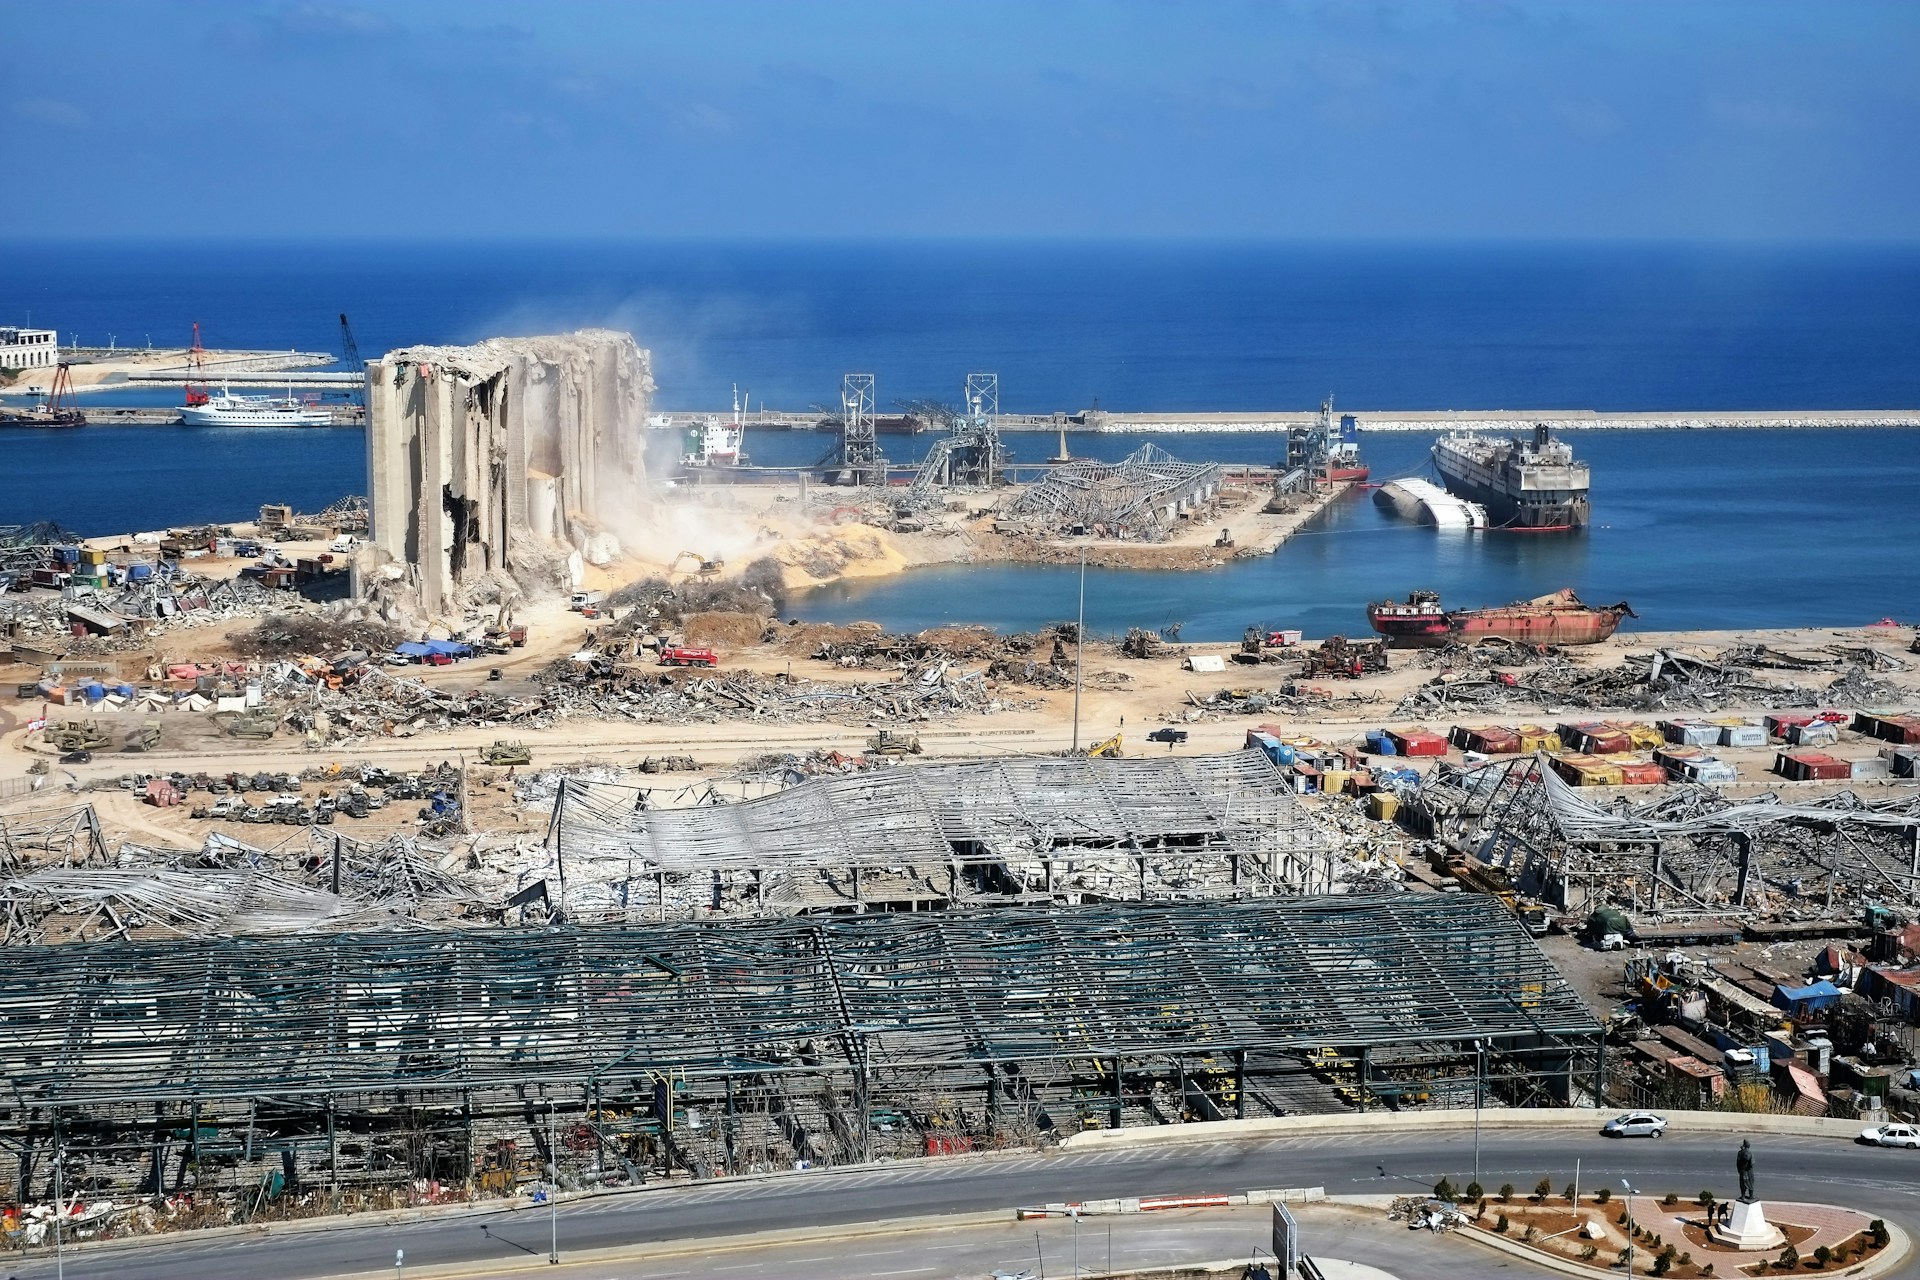 The port in Lebanon shortly after the blast